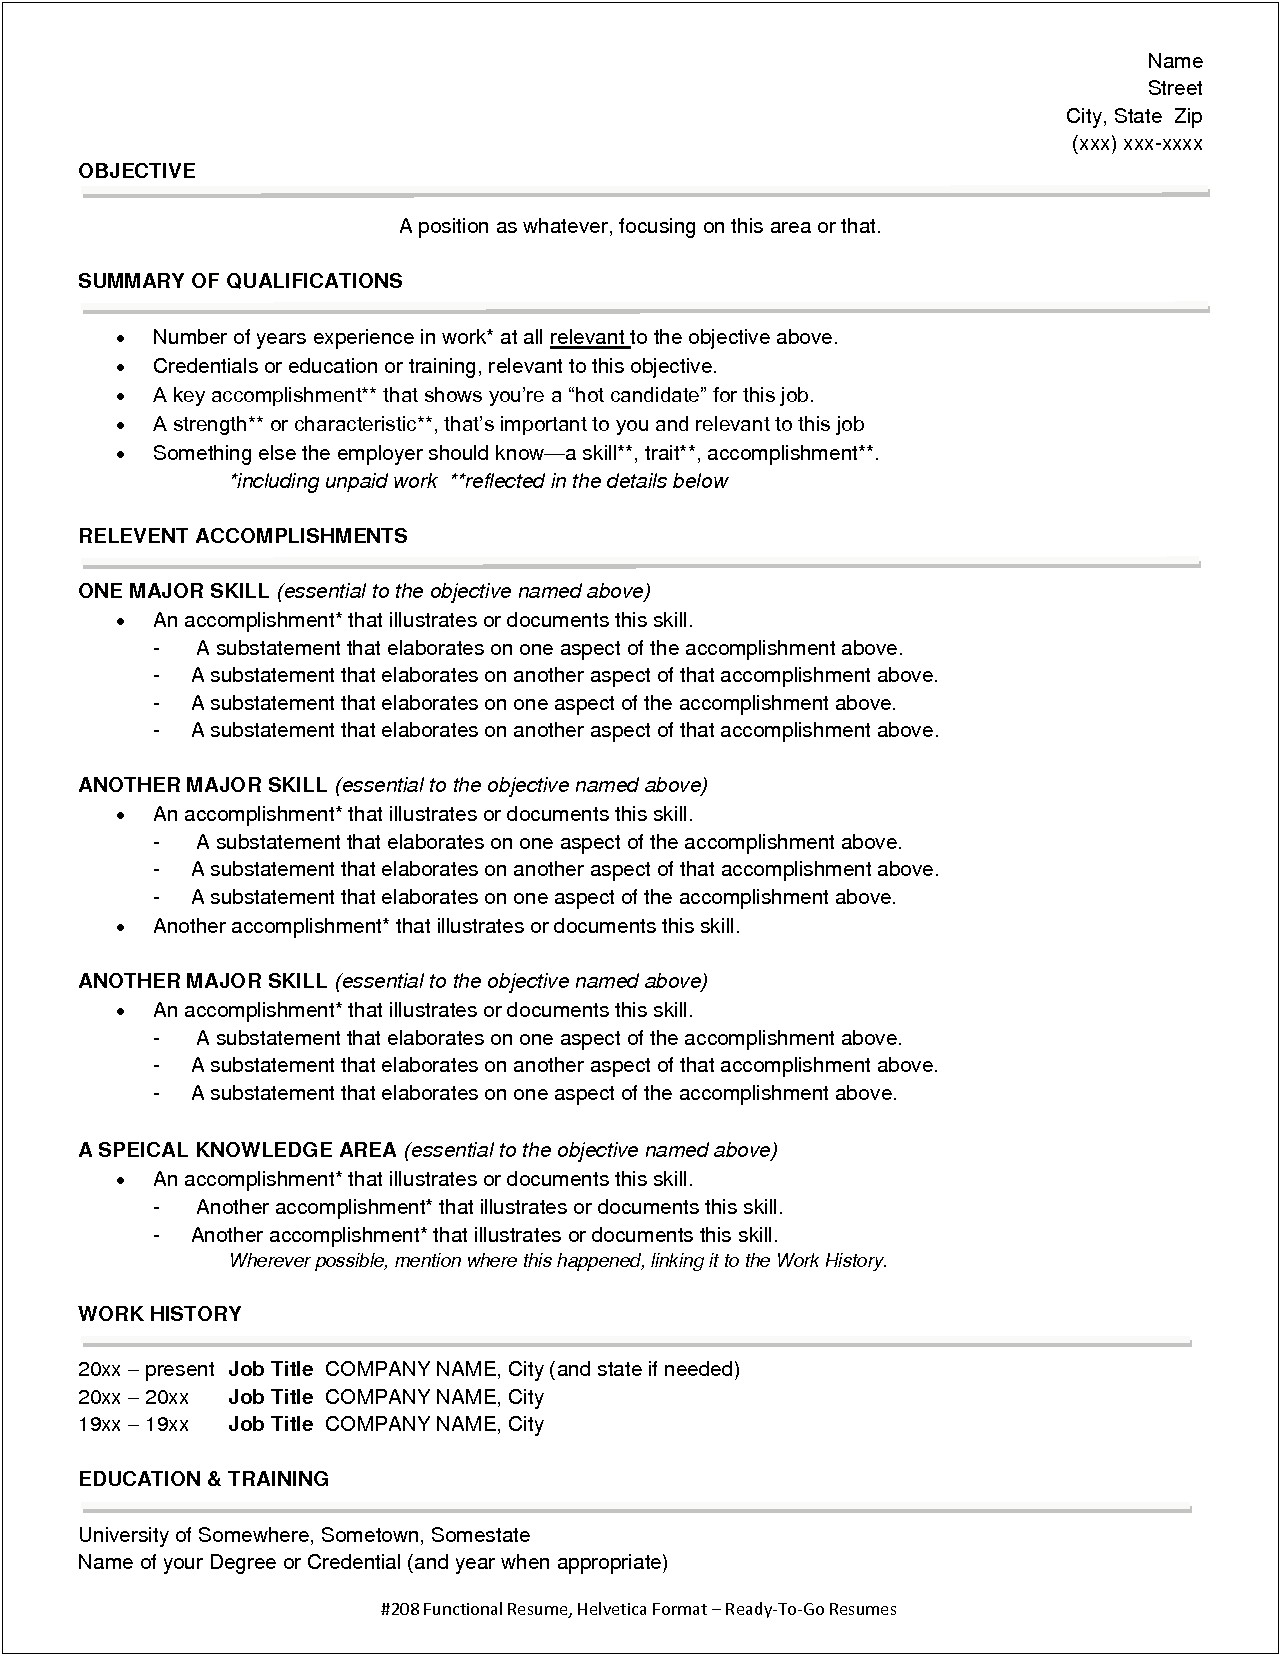 Free Tips To Write A Functional Resume